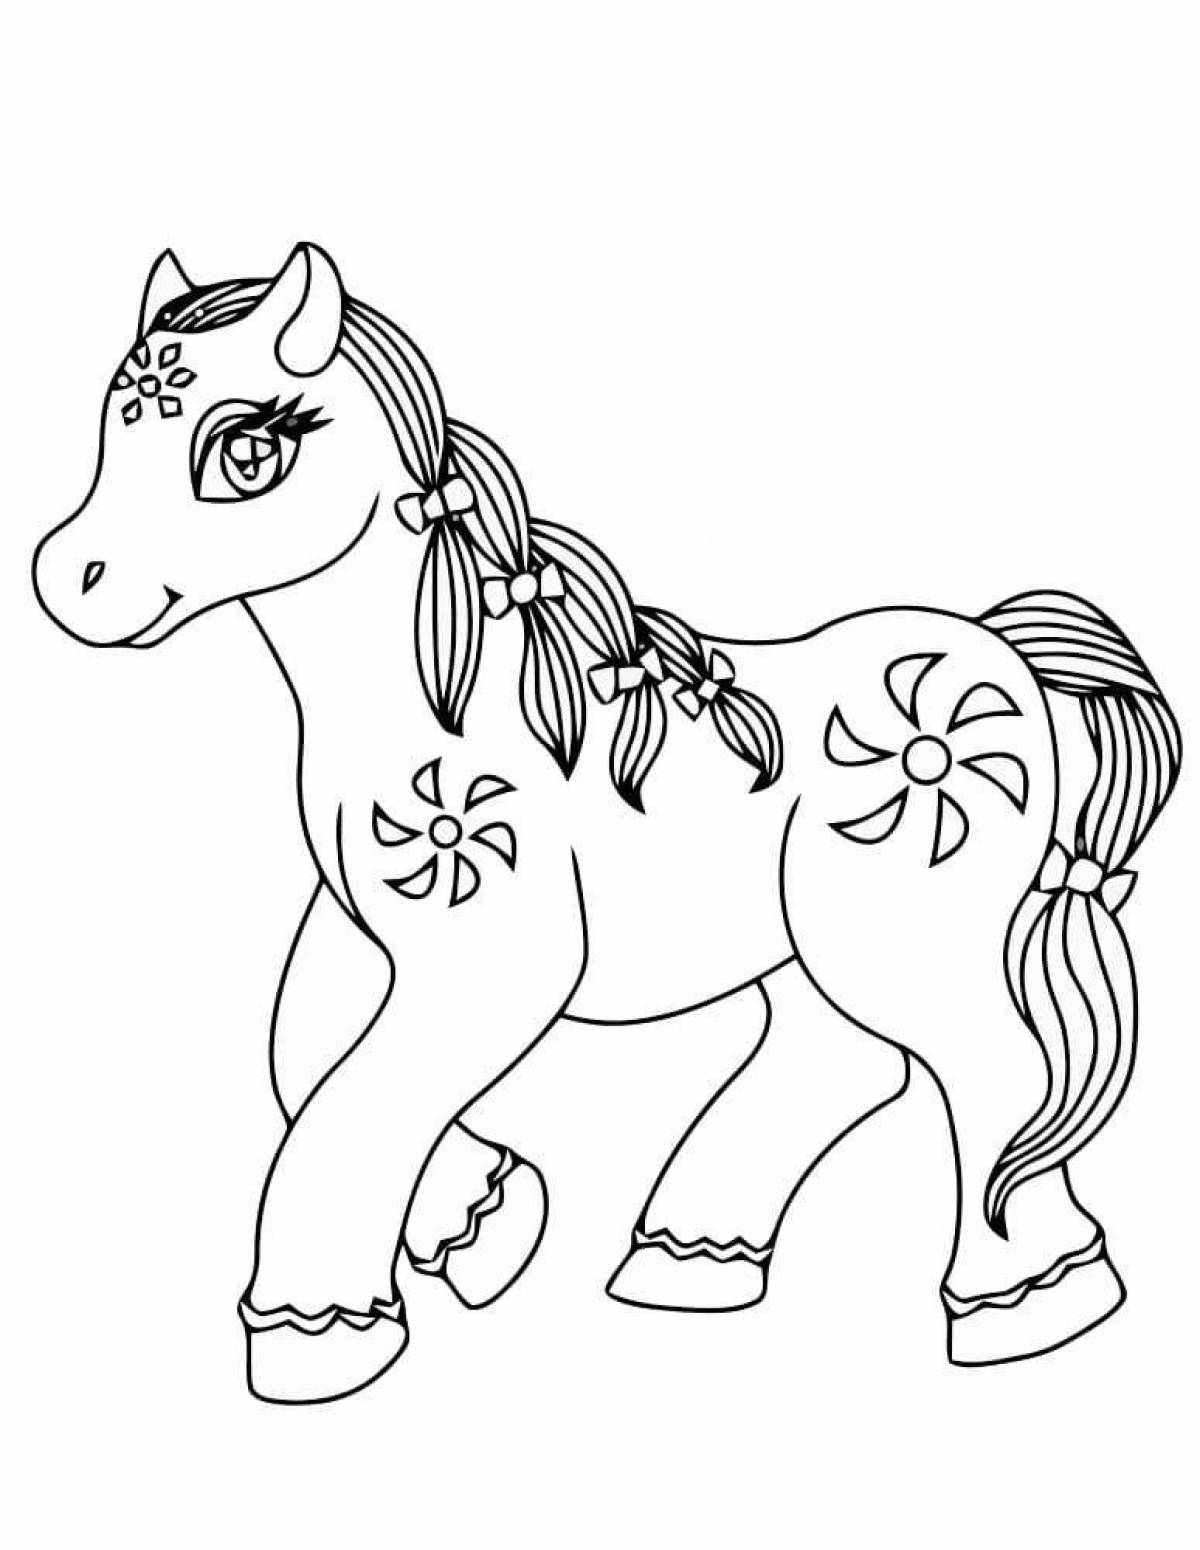 Shine horse coloring book for kids